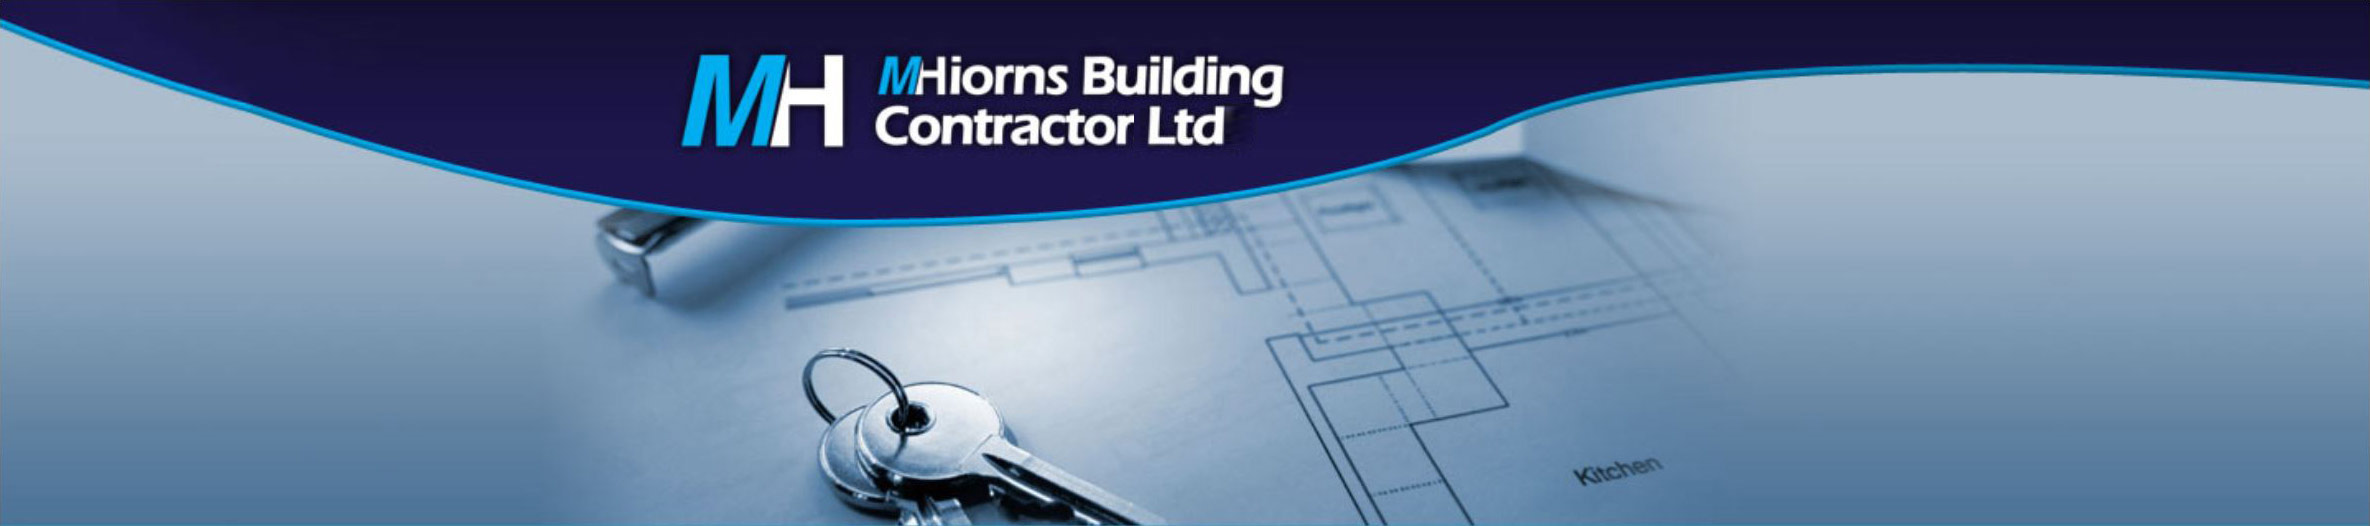 Mike Hiorns Building Contractor